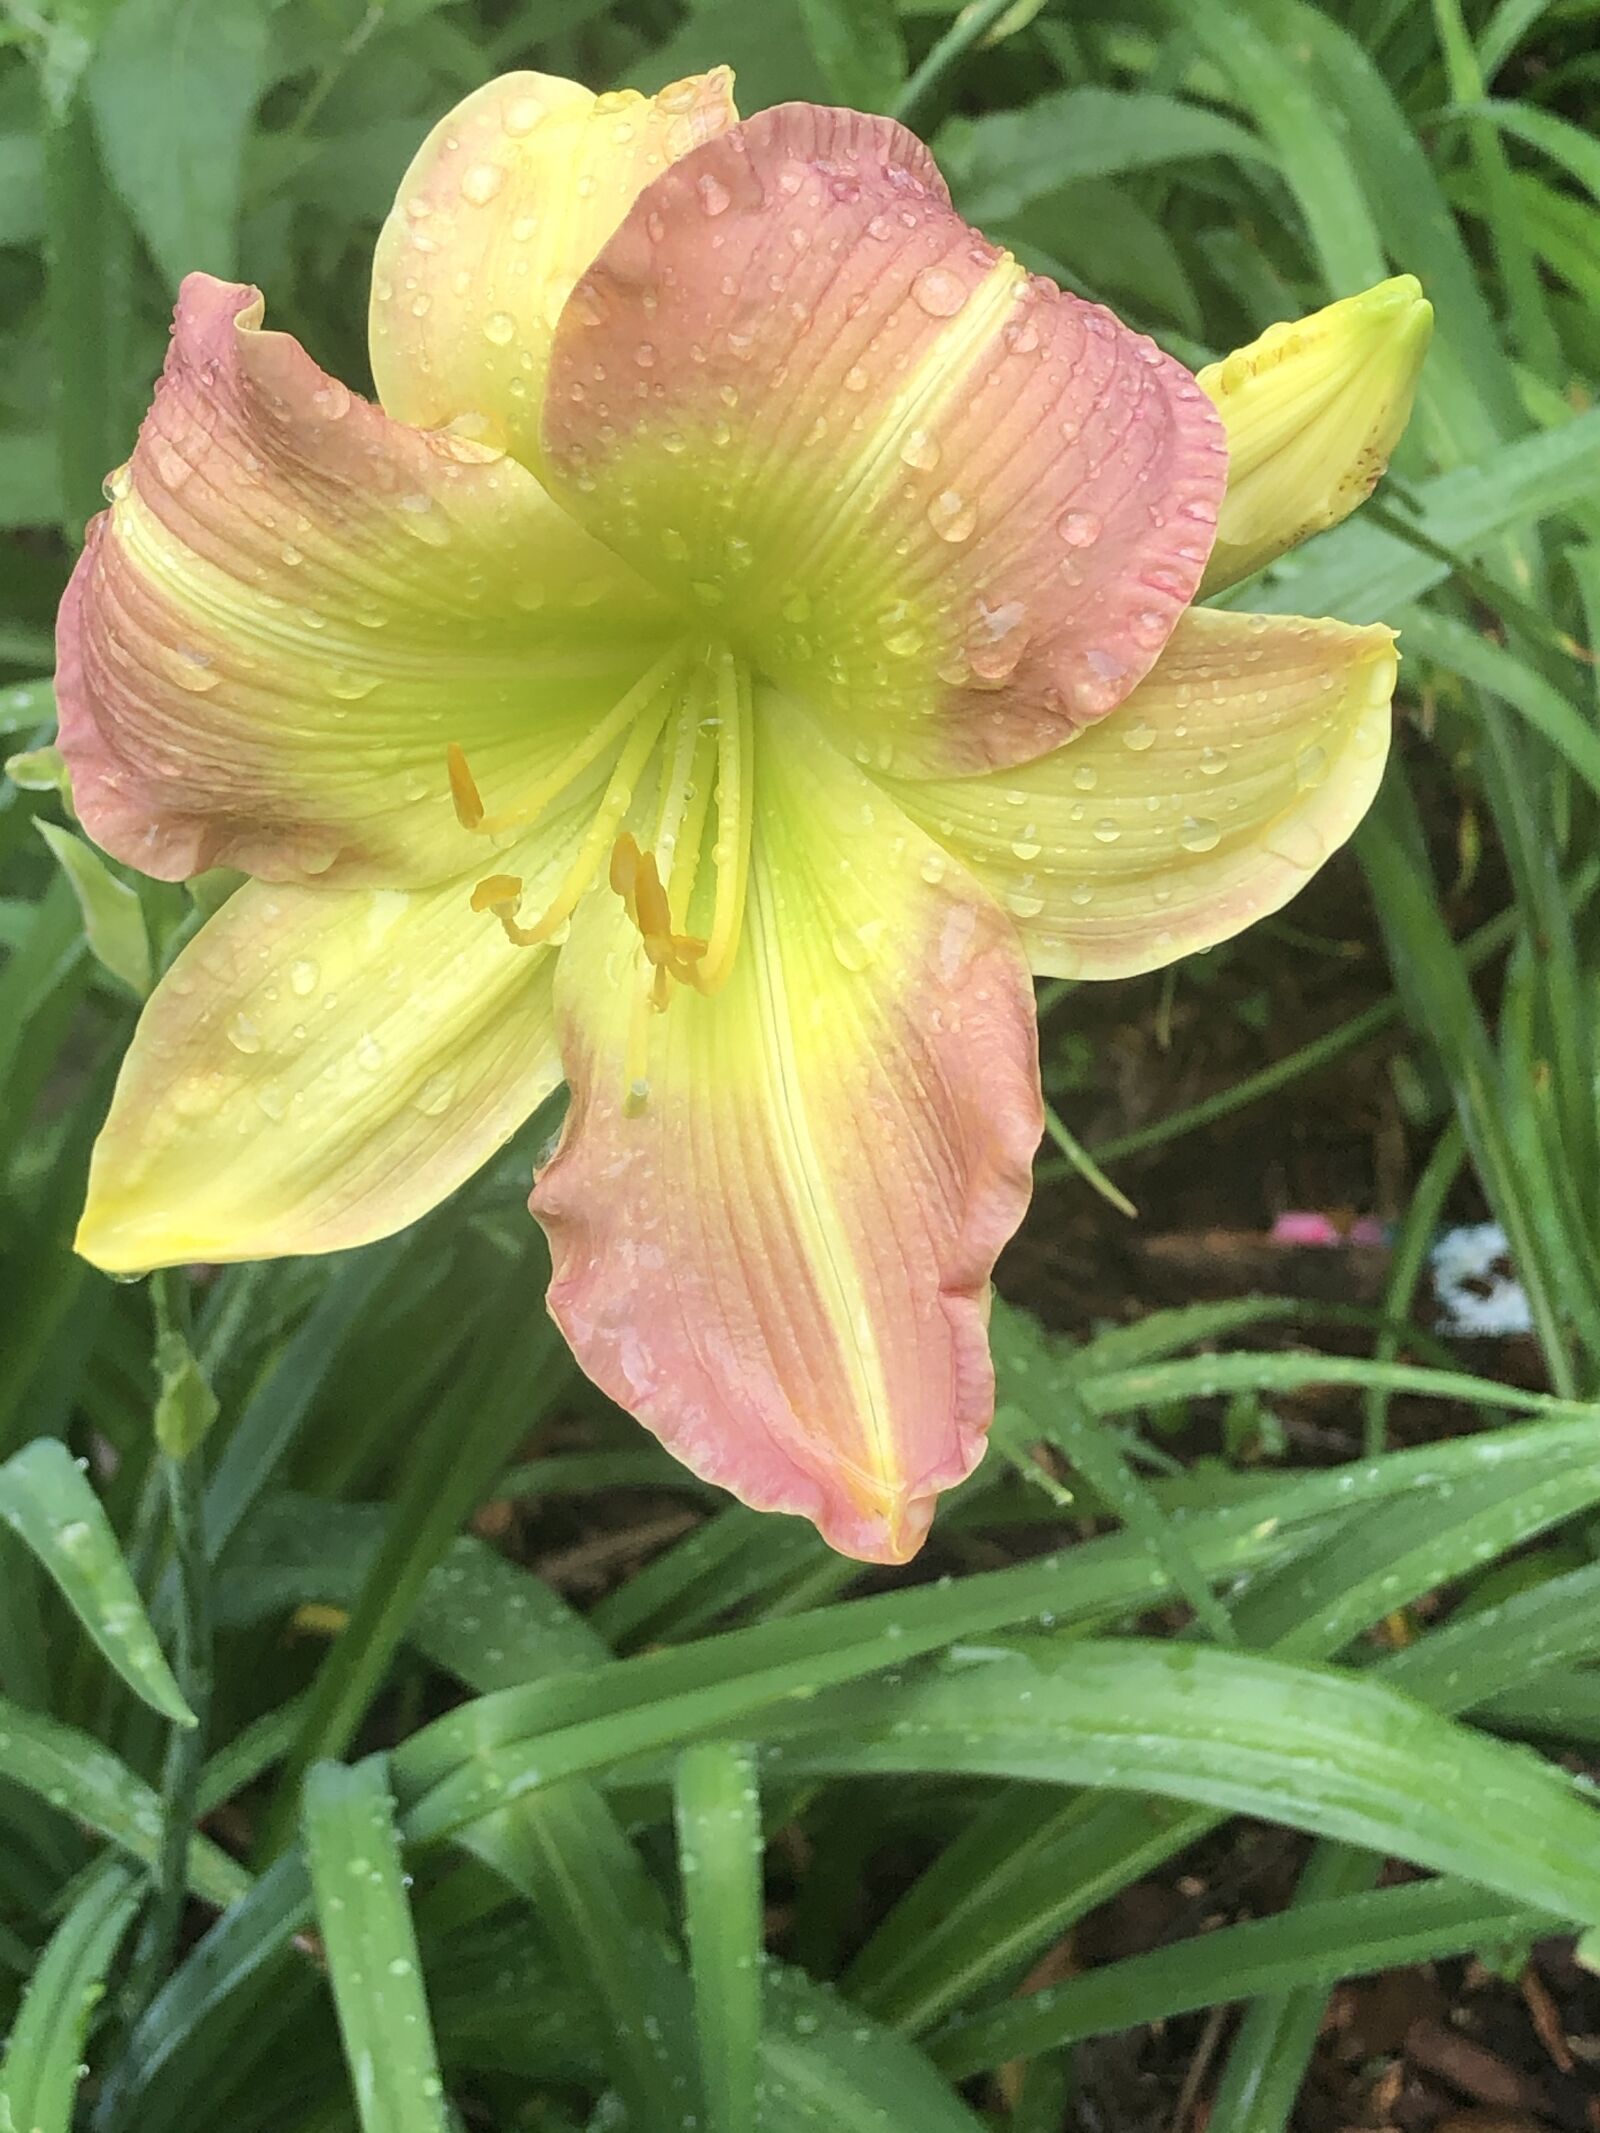 iPhone 8 Plus back dual camera 3.99mm f/1.8 sample photo. Day lily, green throat photography